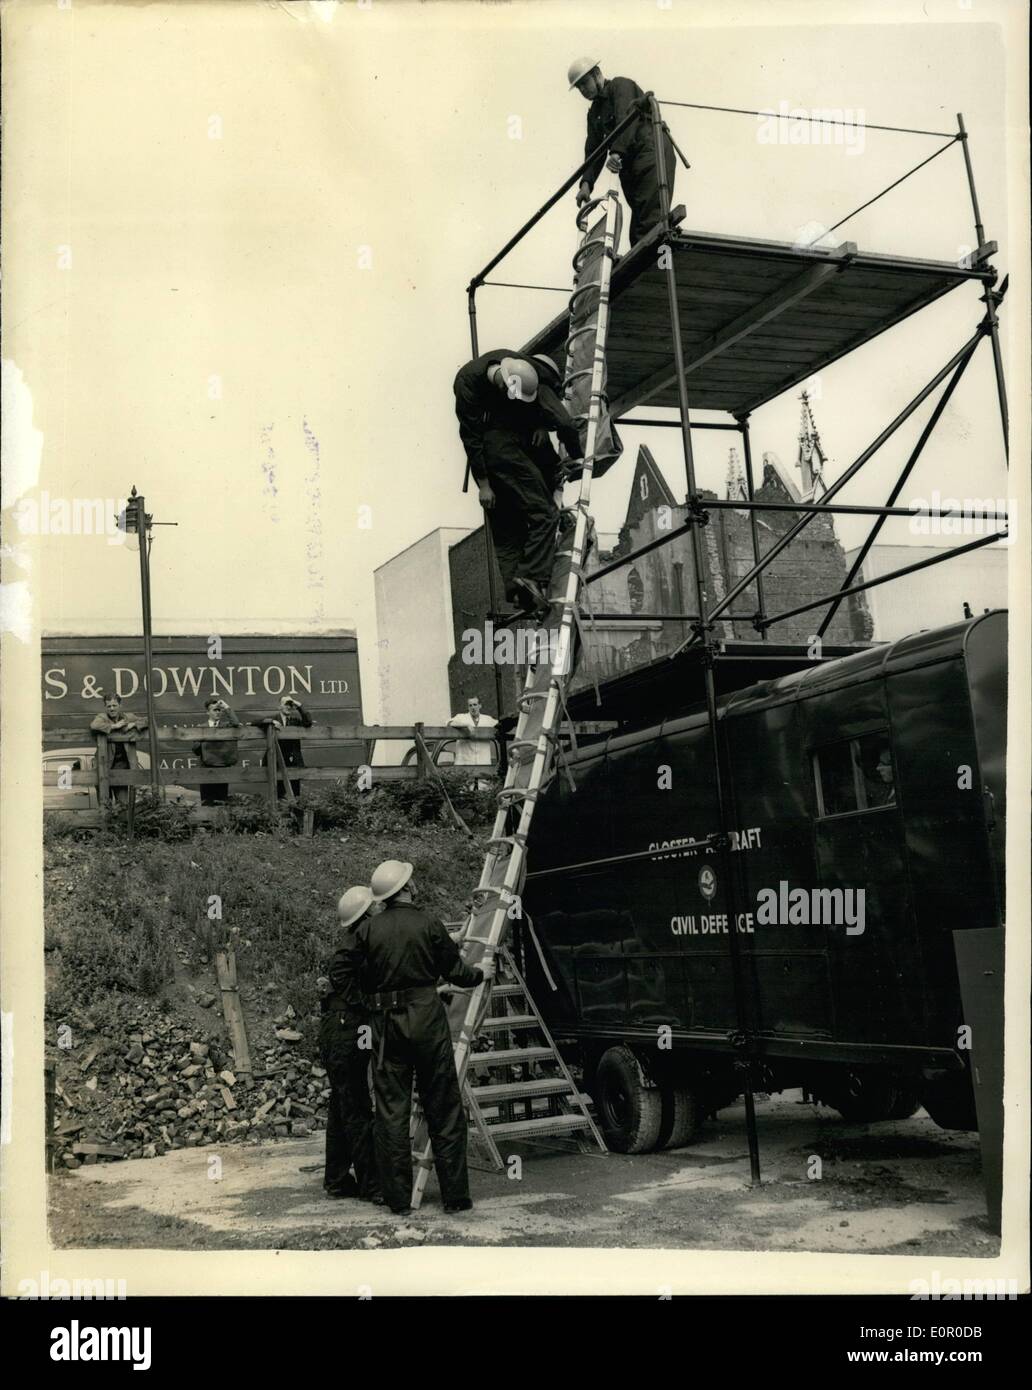 Jul. 17, 1957 - 17-7-57 Demonstration of unique life-saving stretcher ladder. A revolutionary life-saving stretcher-ladder evolved by Gloster Aircraft Company, was demonstrated in London this morning. It is ideal for lowering casualties from upper windows or the side of a ship, can be tilted to pass through narrow openings and is ideal for mountain rescue. The stretchers can be joined together to form a lightweight ladder. They are extremely light and can be packed into confined spaces Stock Photo